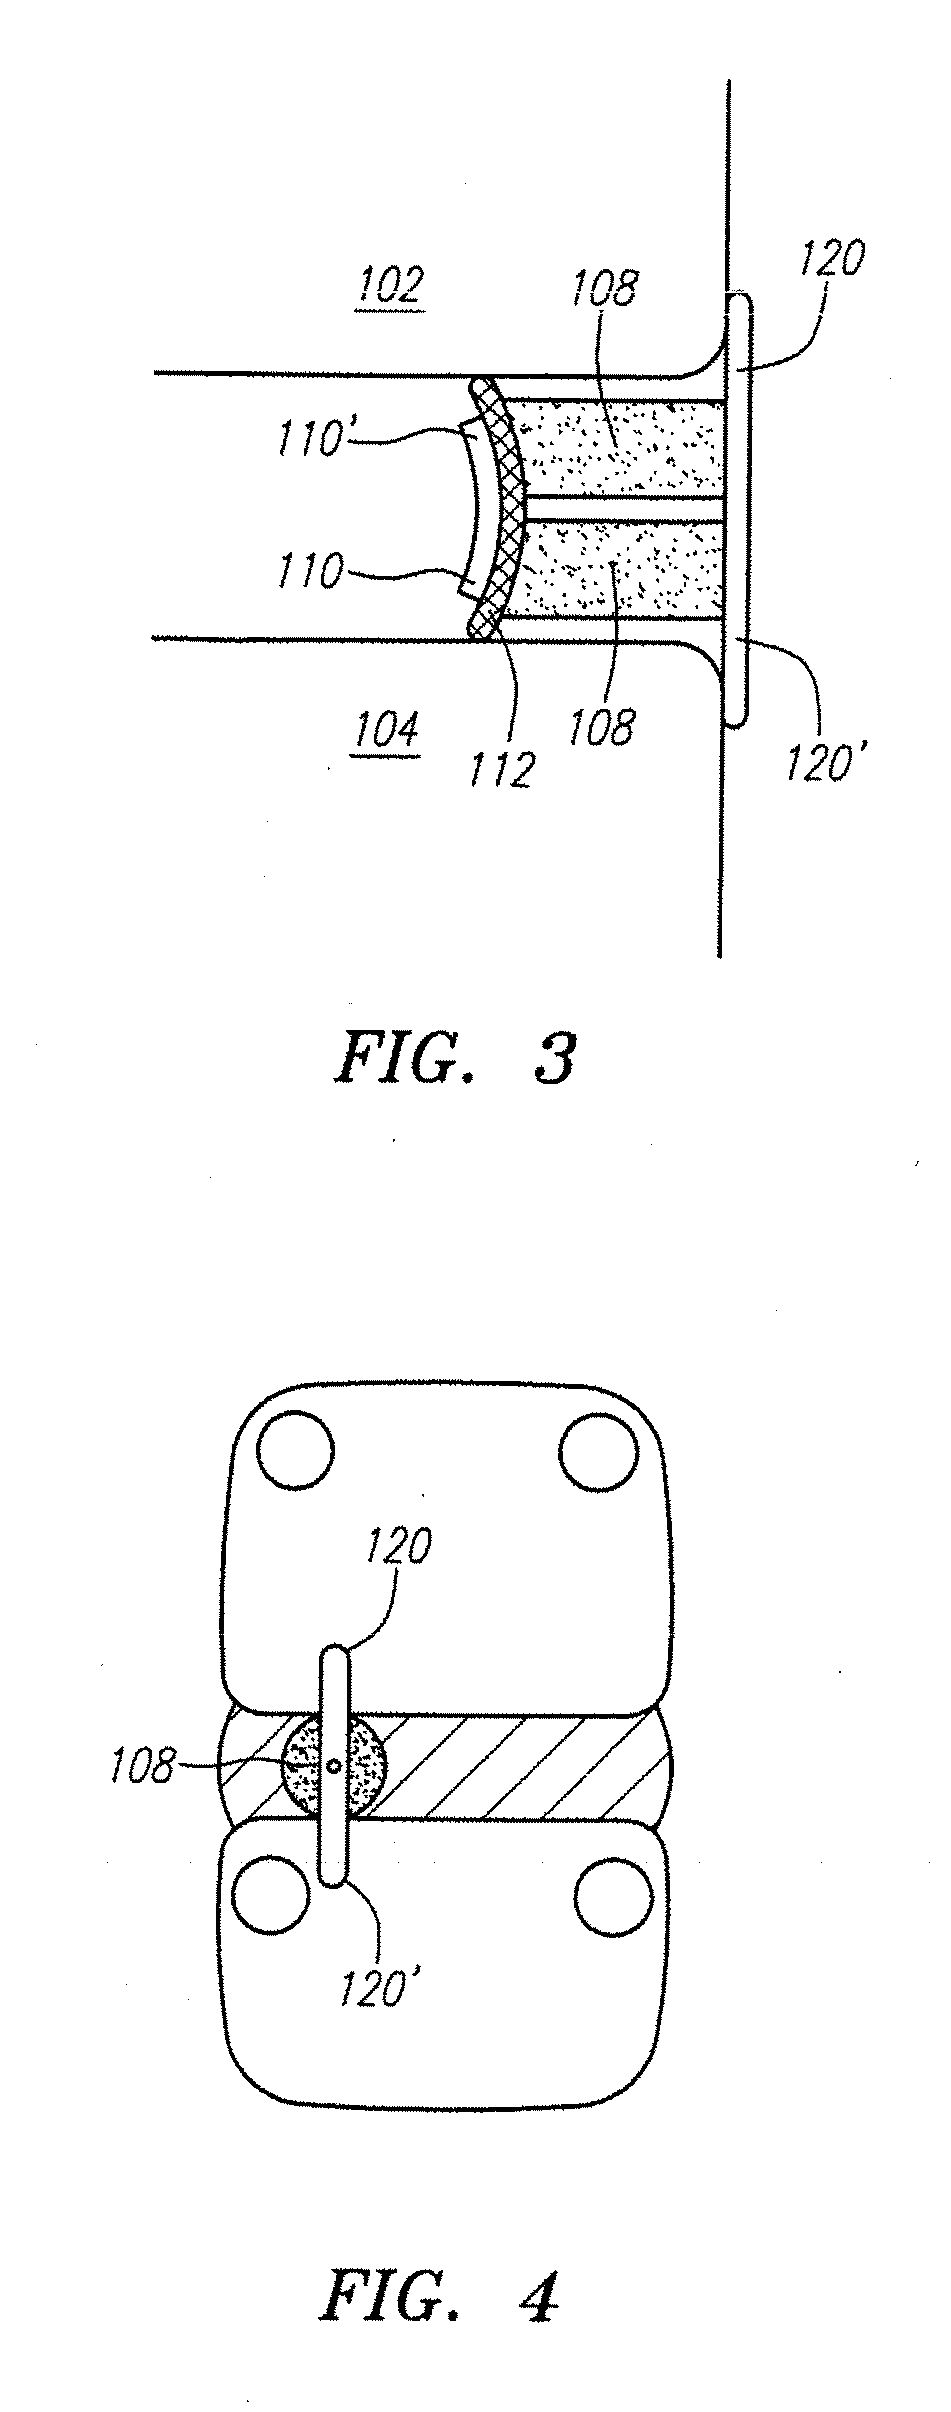 Annular repair devices and methods